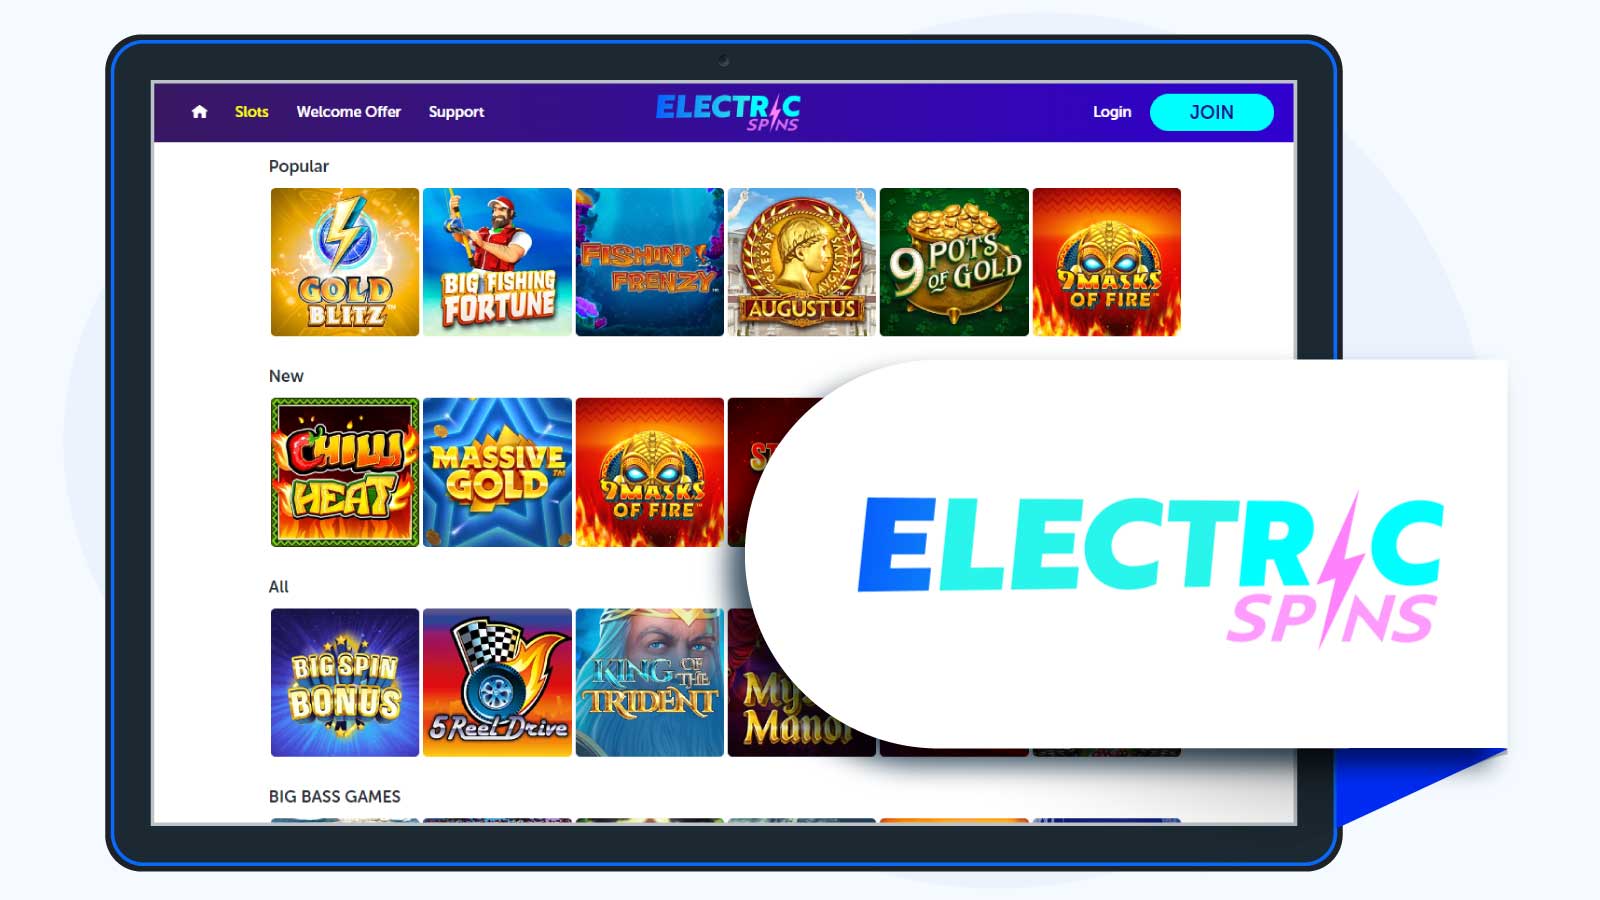 Electric Spins Casino 200% up to £20 + 100 Free Spins